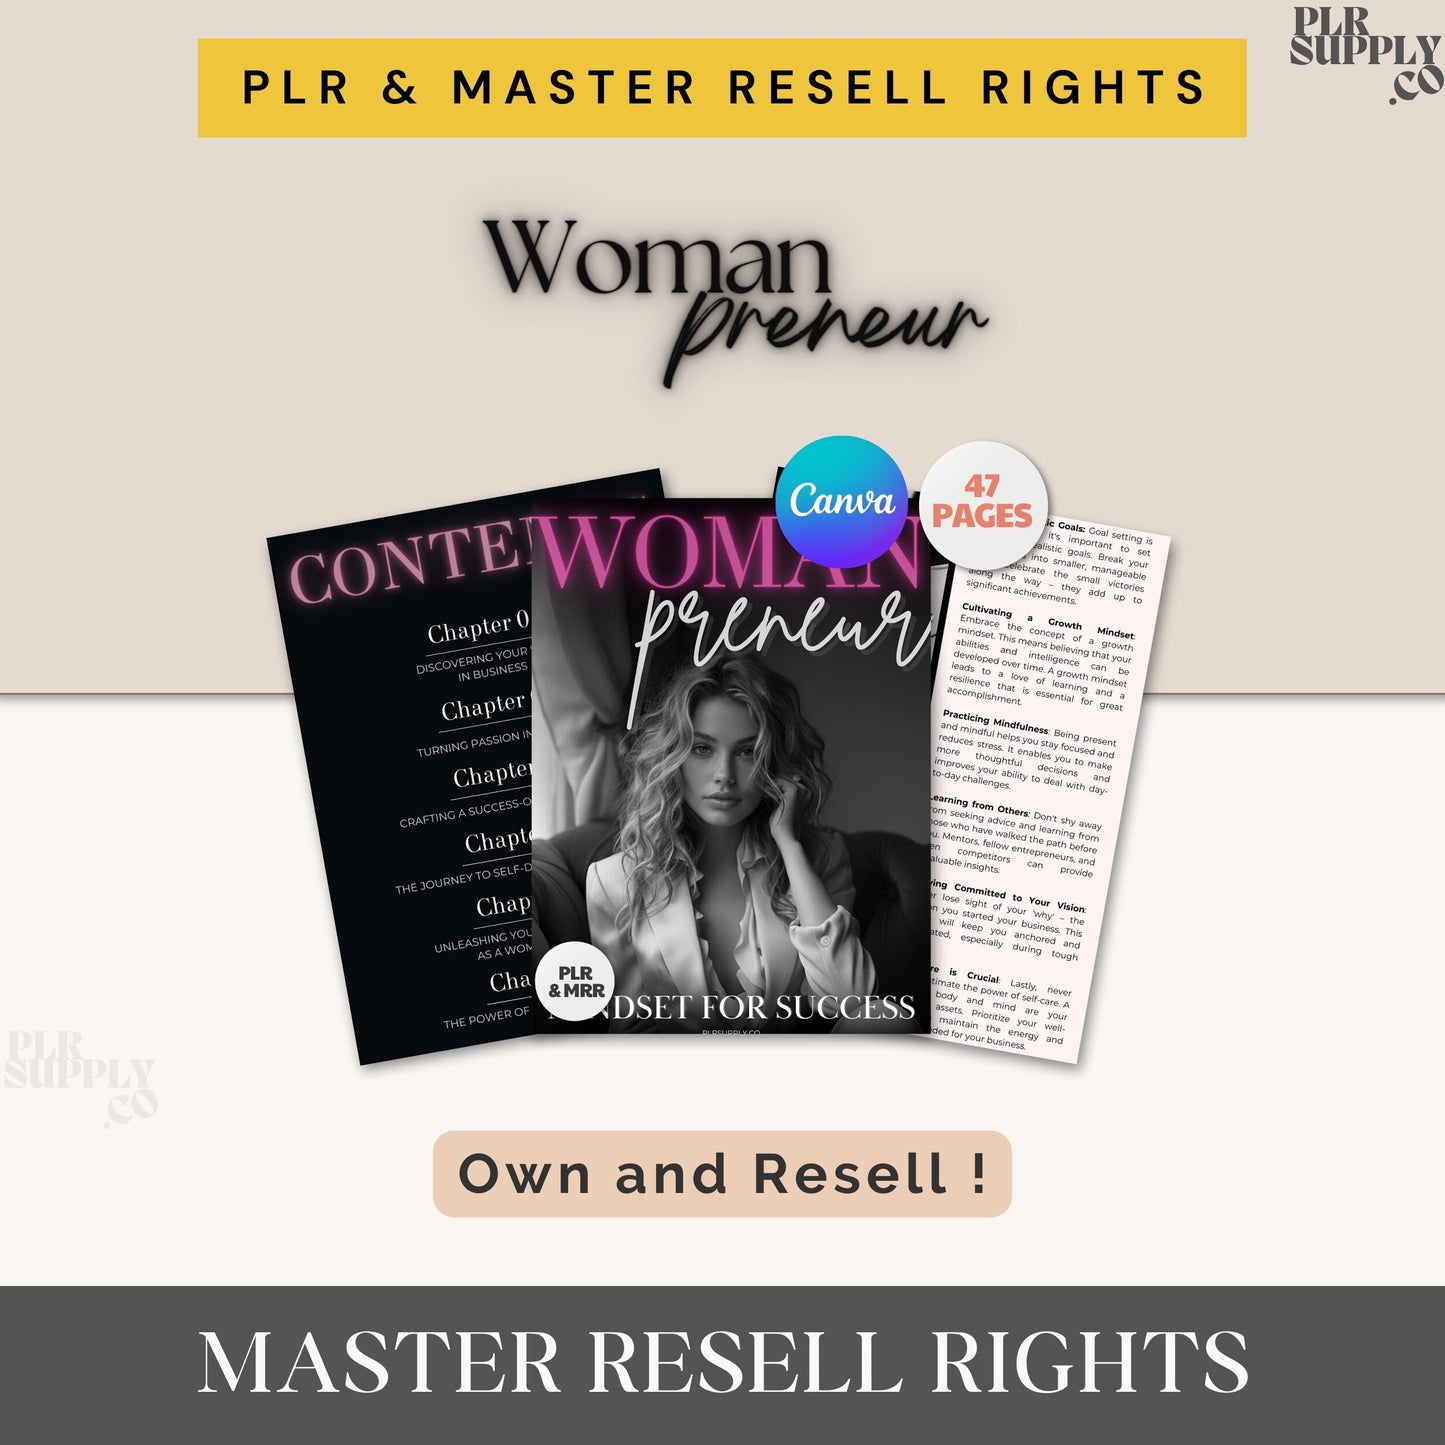 Woman Entrepreneur Wealth Course and Workbook to Make Money Online - DFY Digital Product